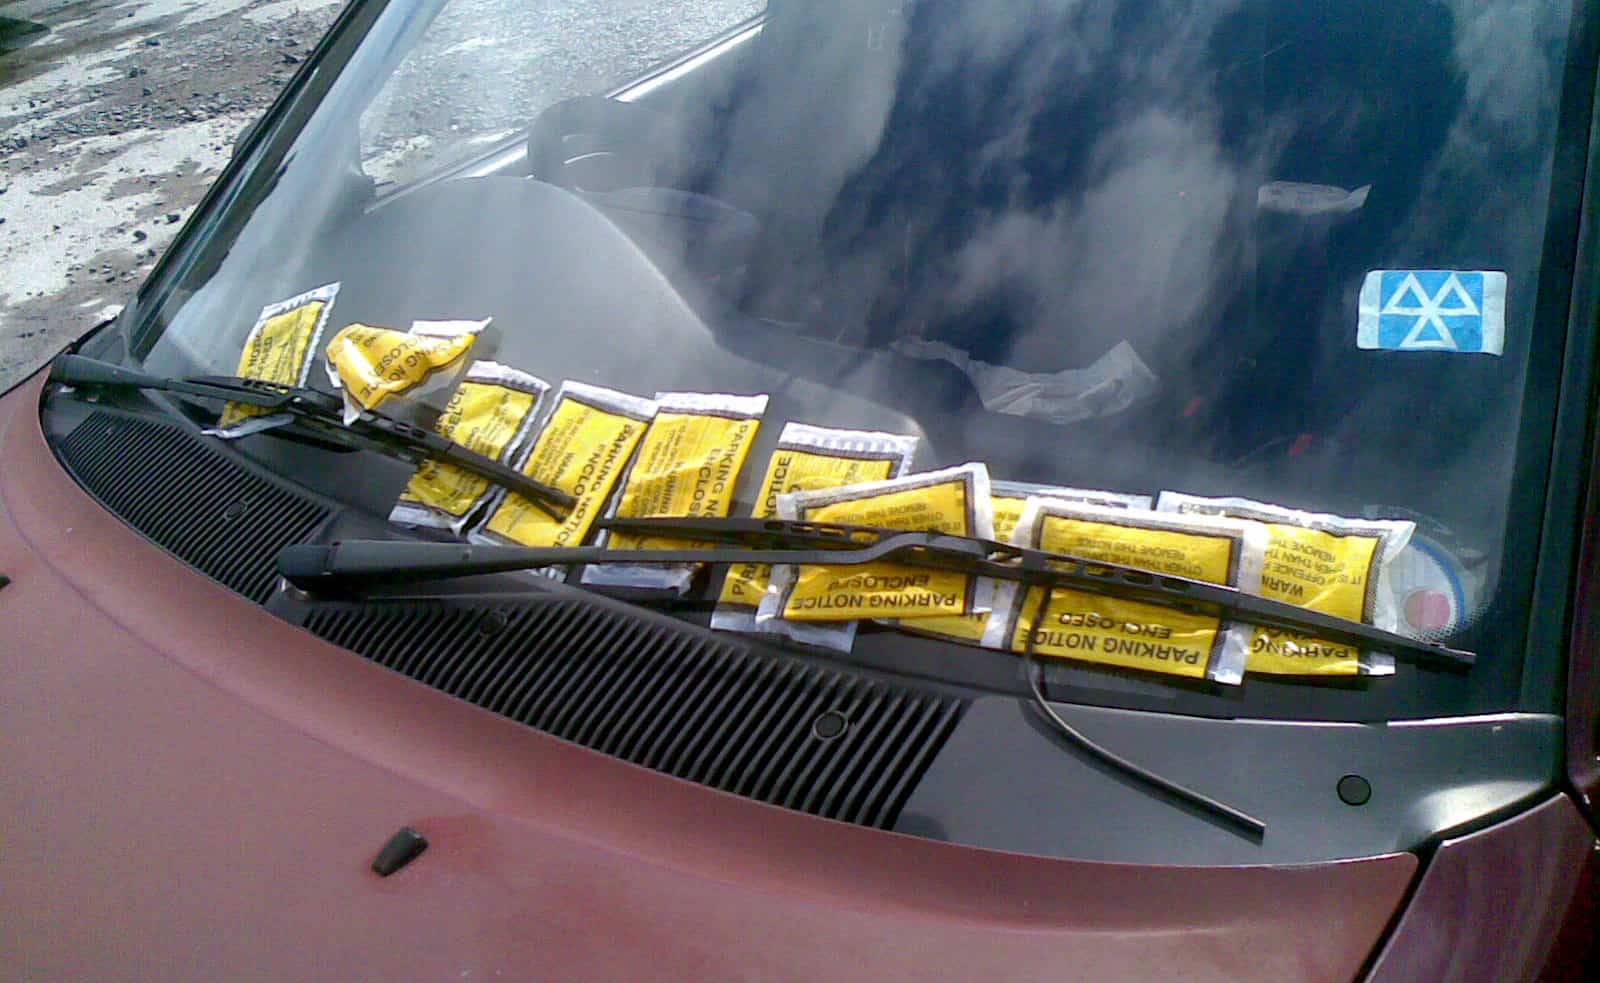 loads of parking tickets on the windscreen of a car